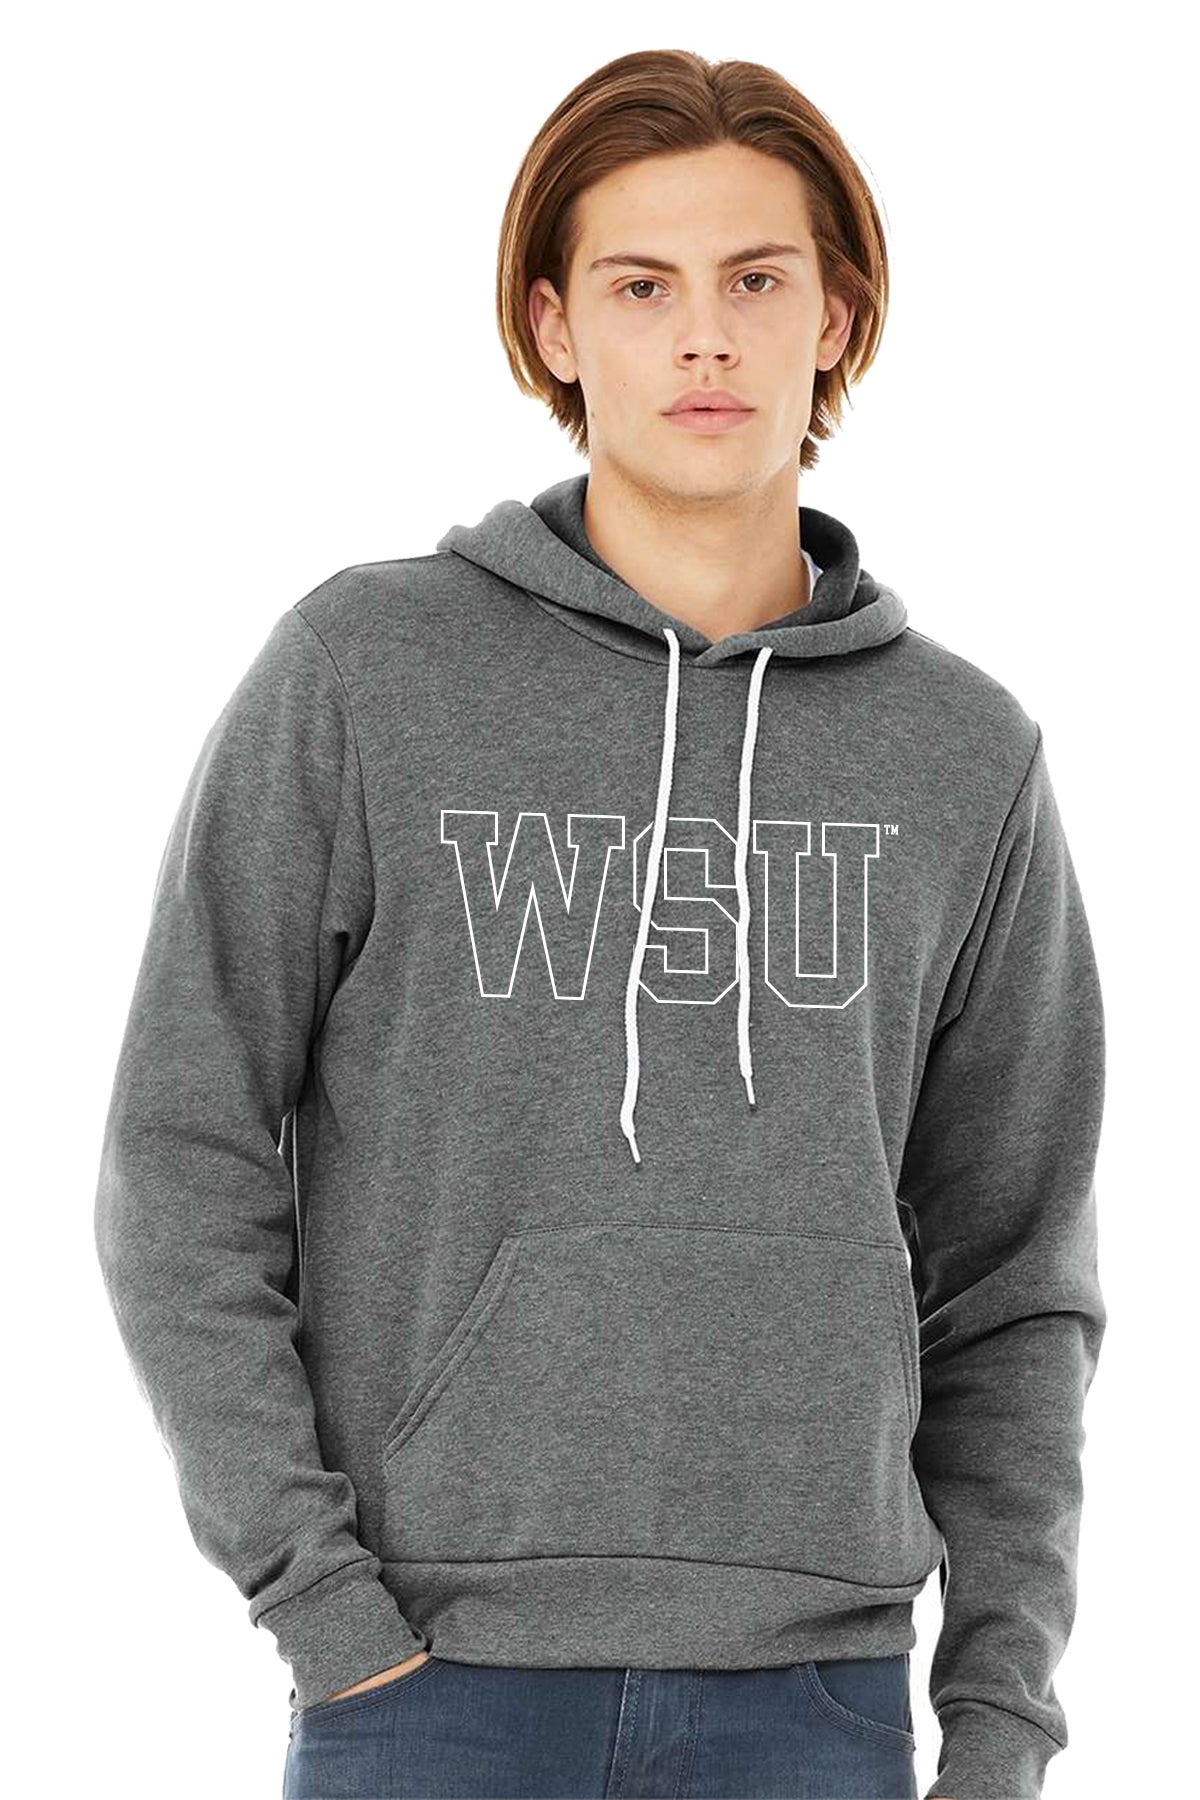 Butch's Go Cougs Hoodie